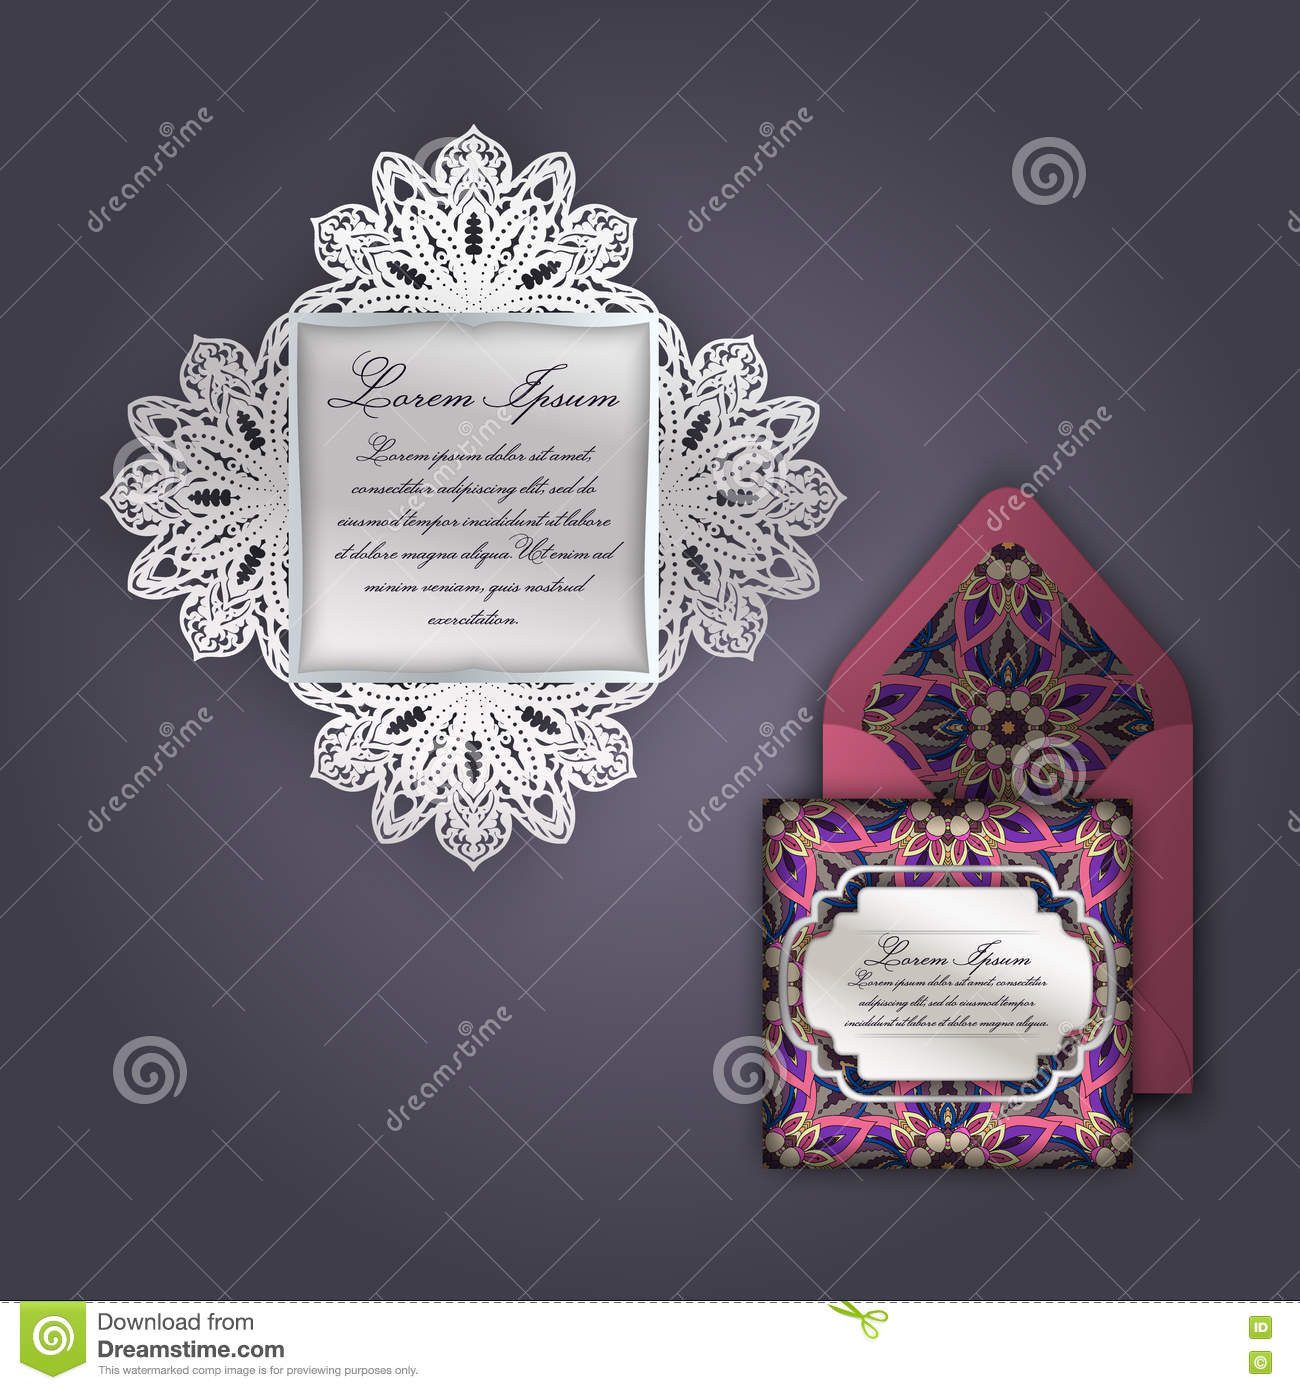 Wedding Invitation Paper Stock
 Wedding Invitation Greeting Card With Vintage Floral